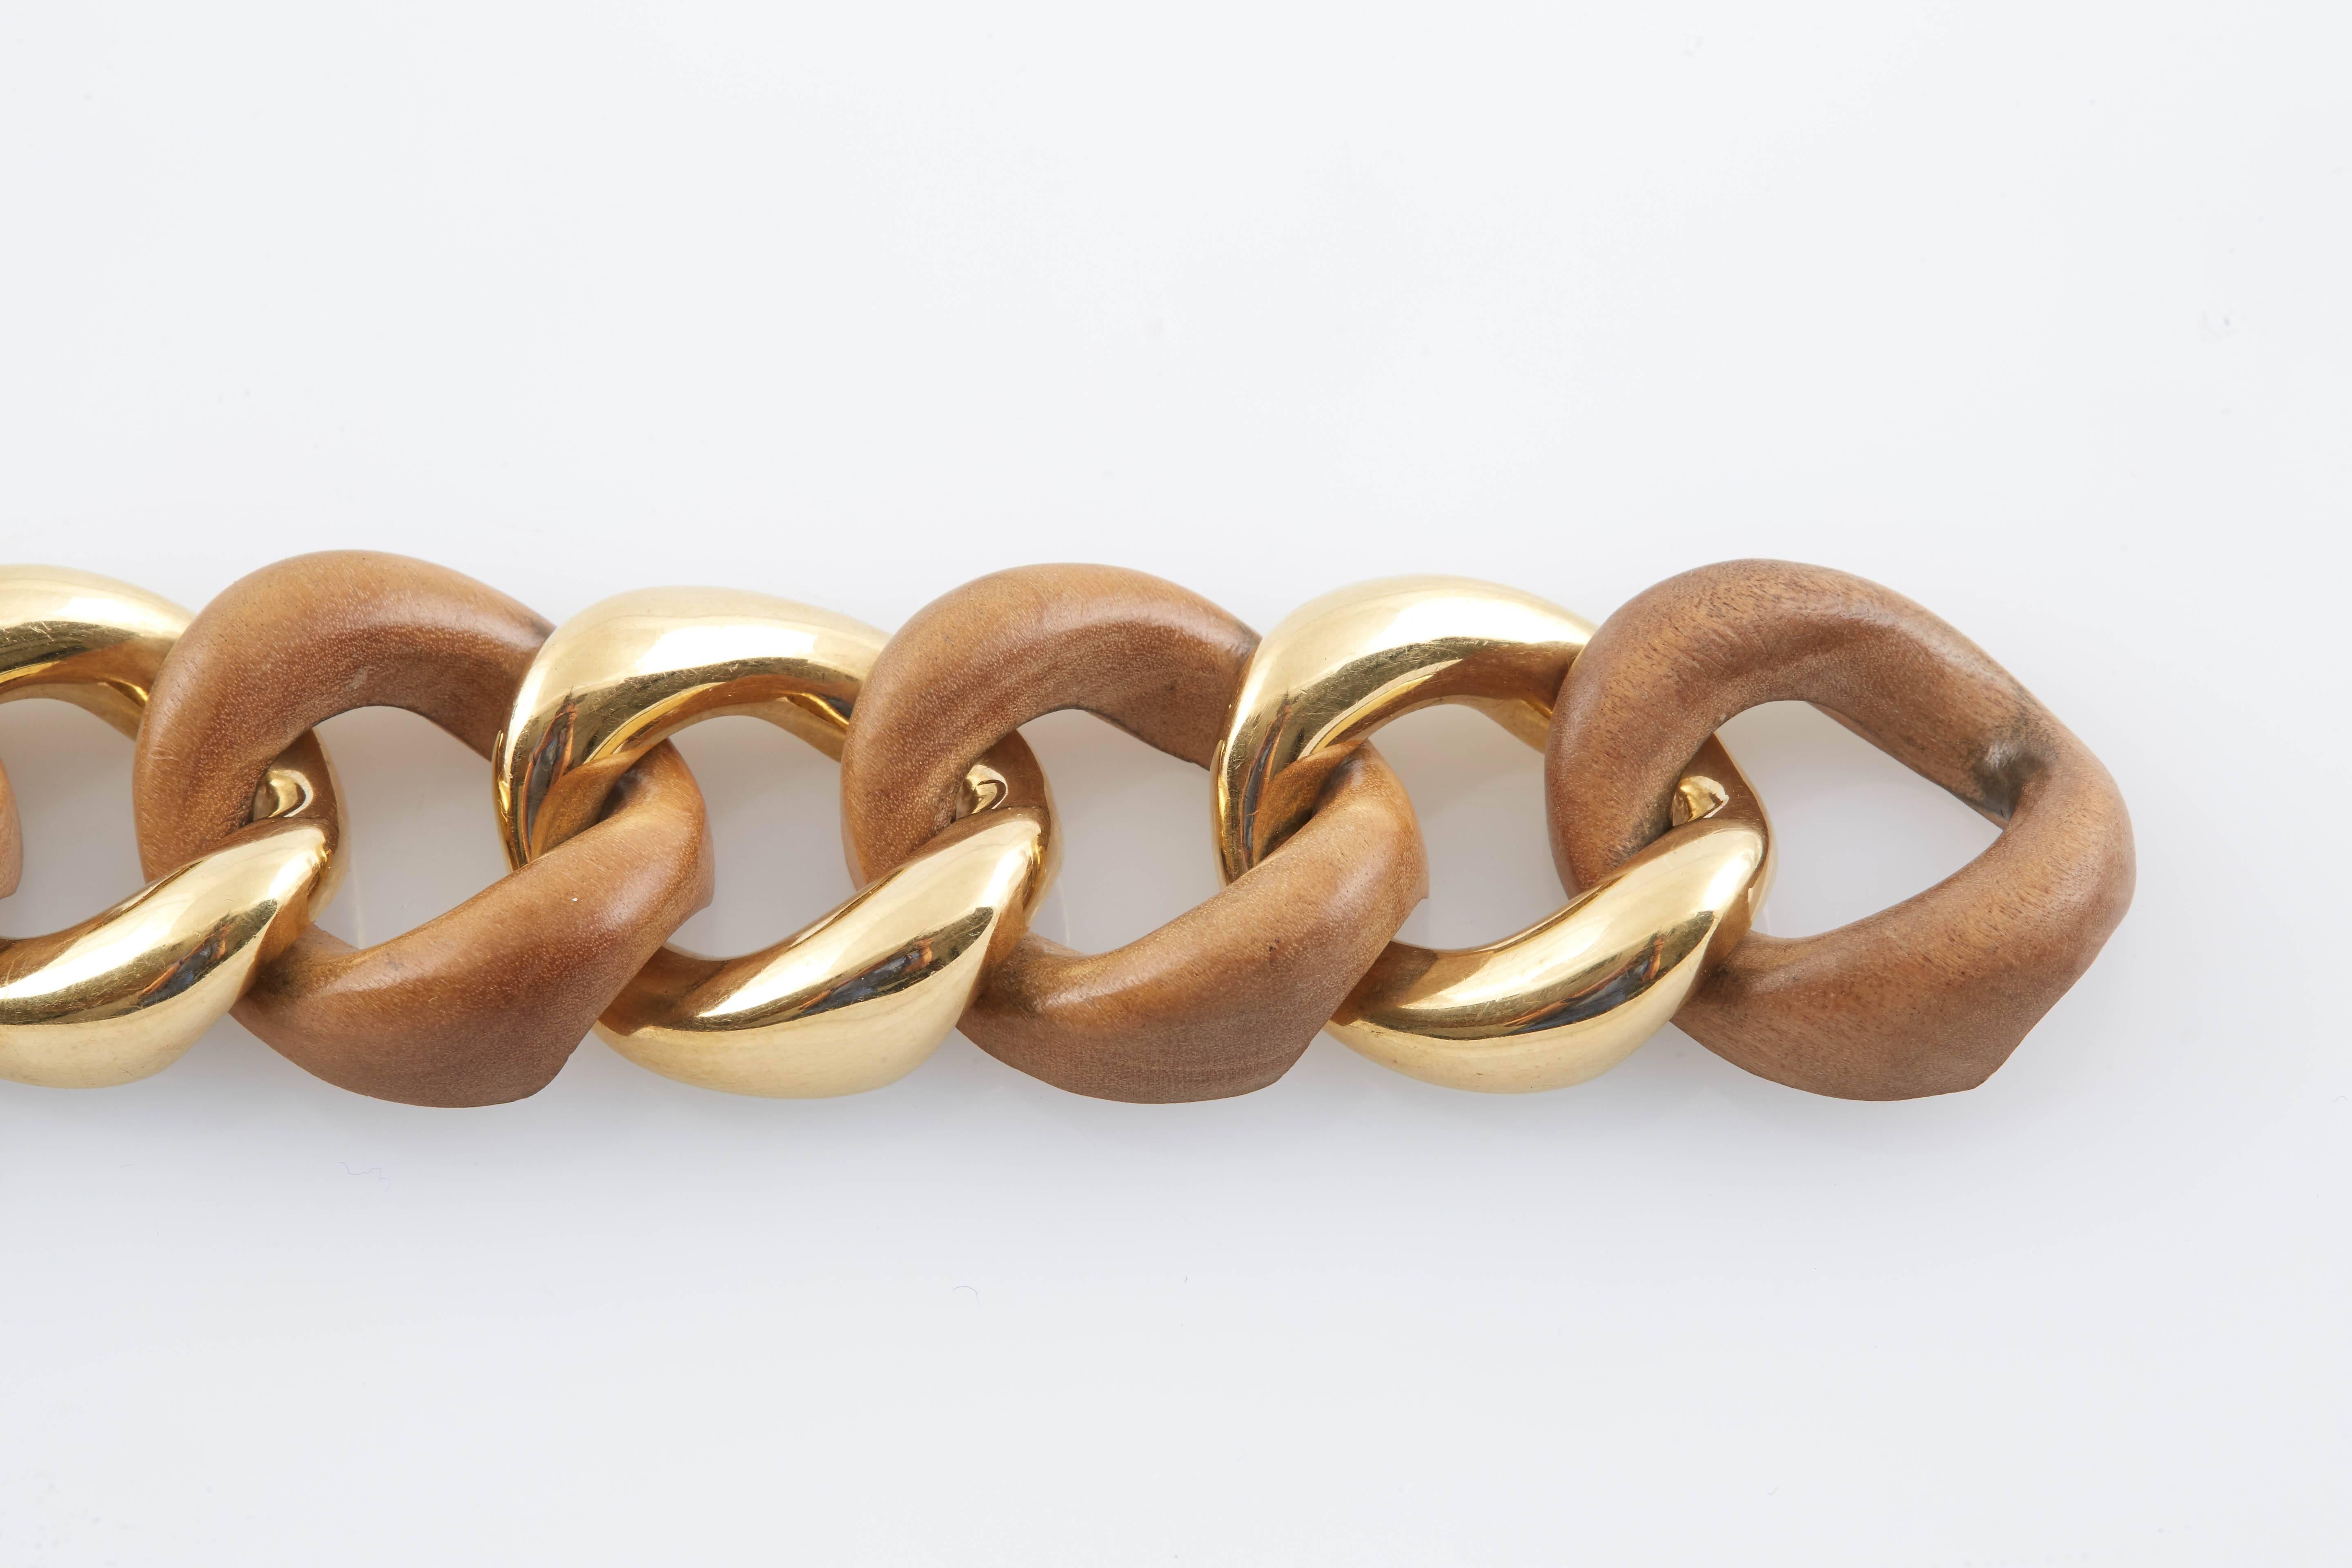 Large and Bold 18K Yellow gold and Wood link Bracelet by Seaman Schepps, signed and numbered in original presentation box.